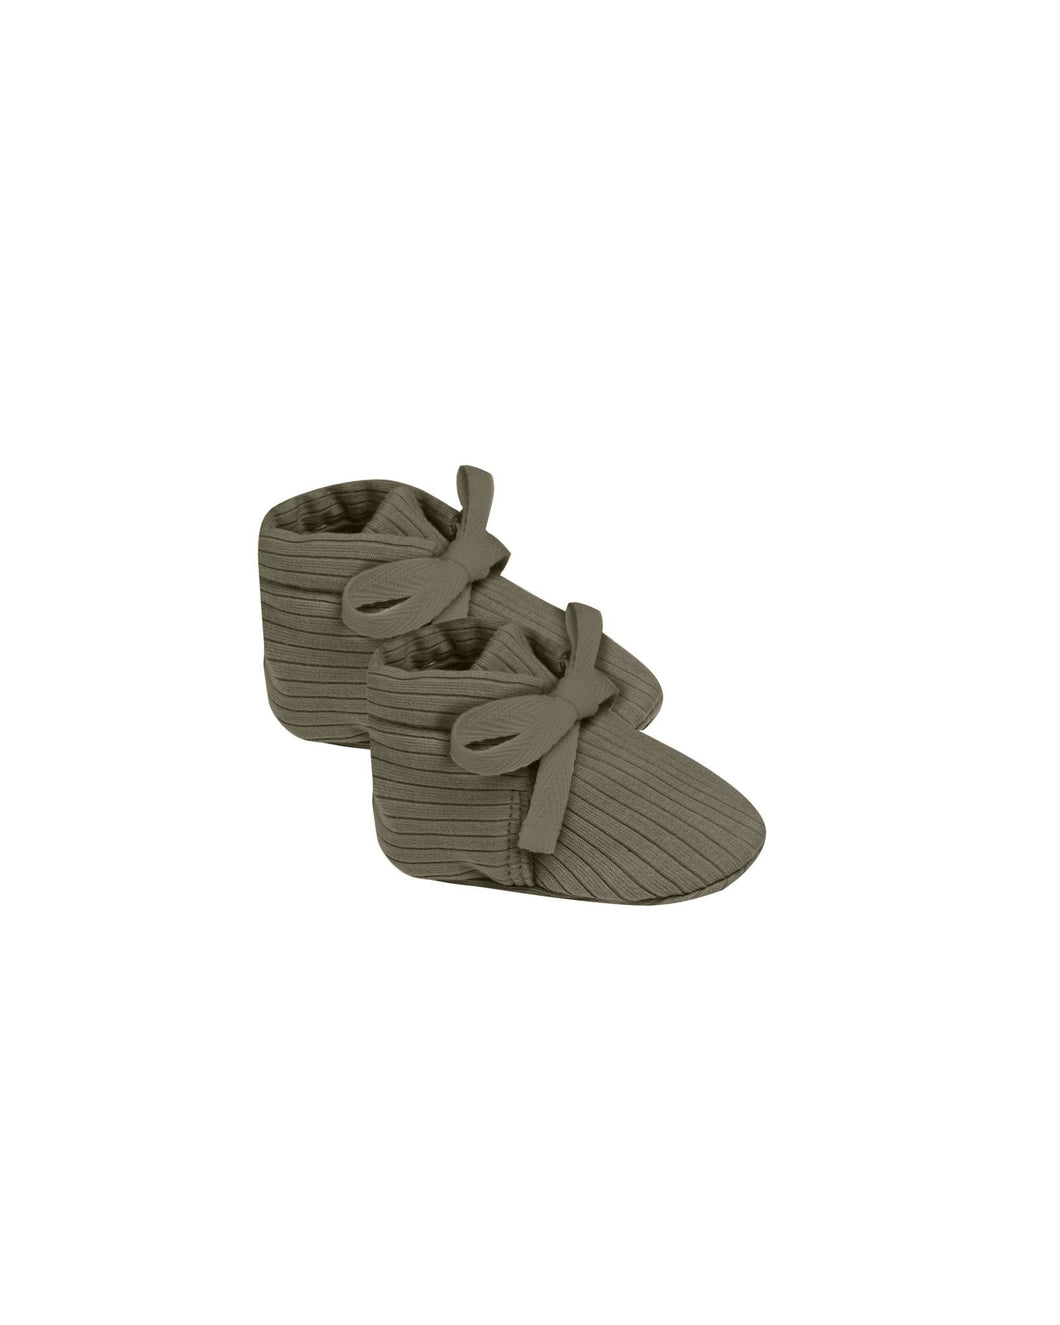 SALE - QUINCY MAE RIBBED BABY BOOTIES || FOREST